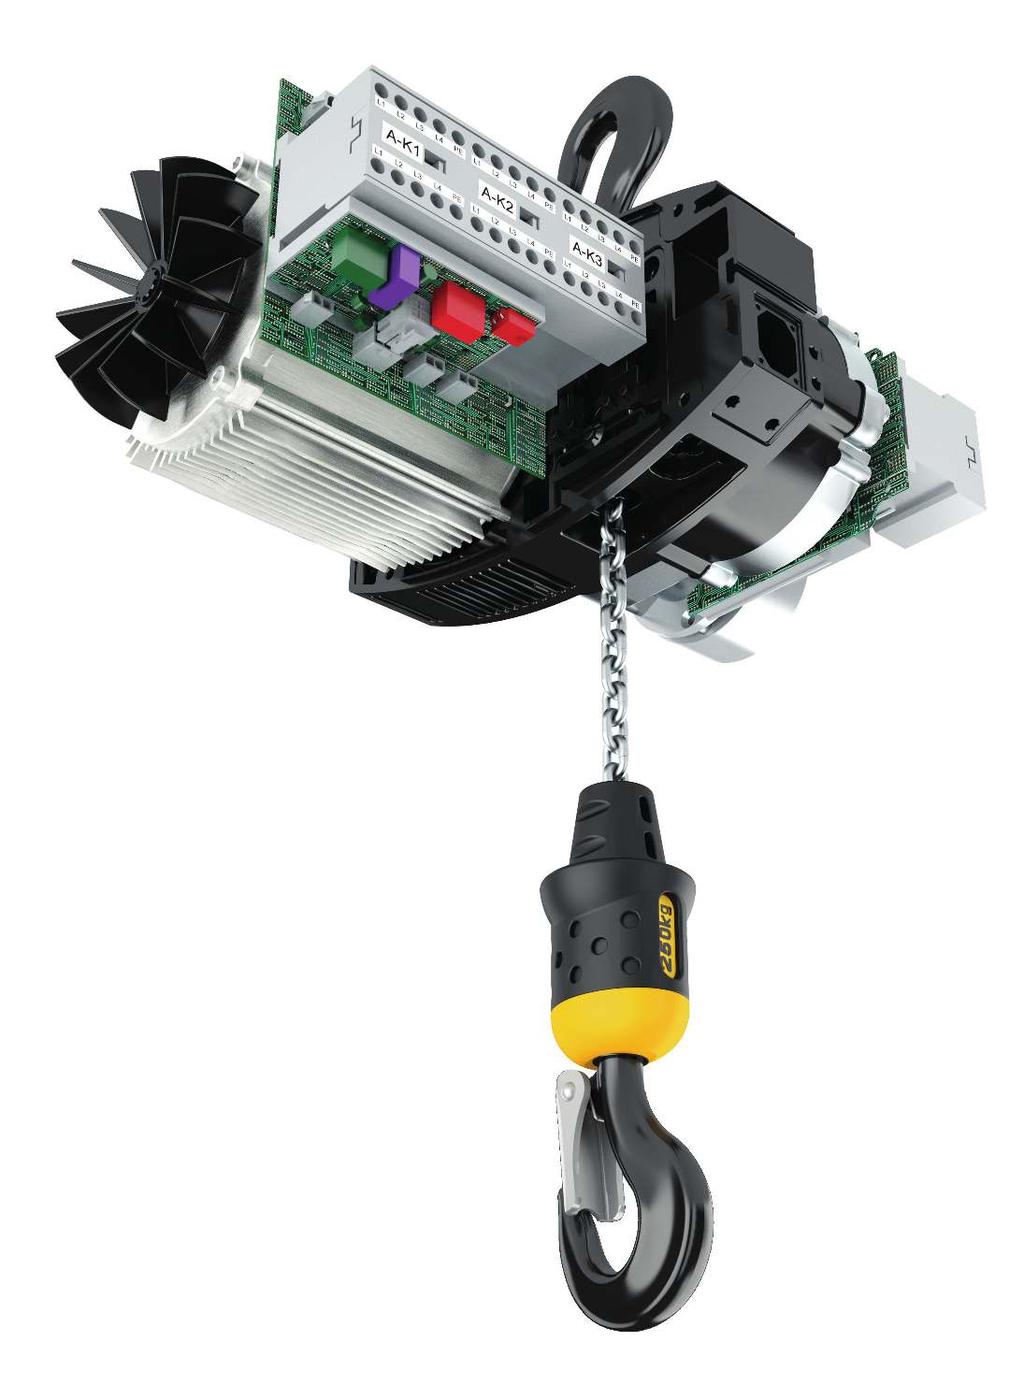 new design Lifting motor Dual-speed as standard for smoother operation and higher productivity.